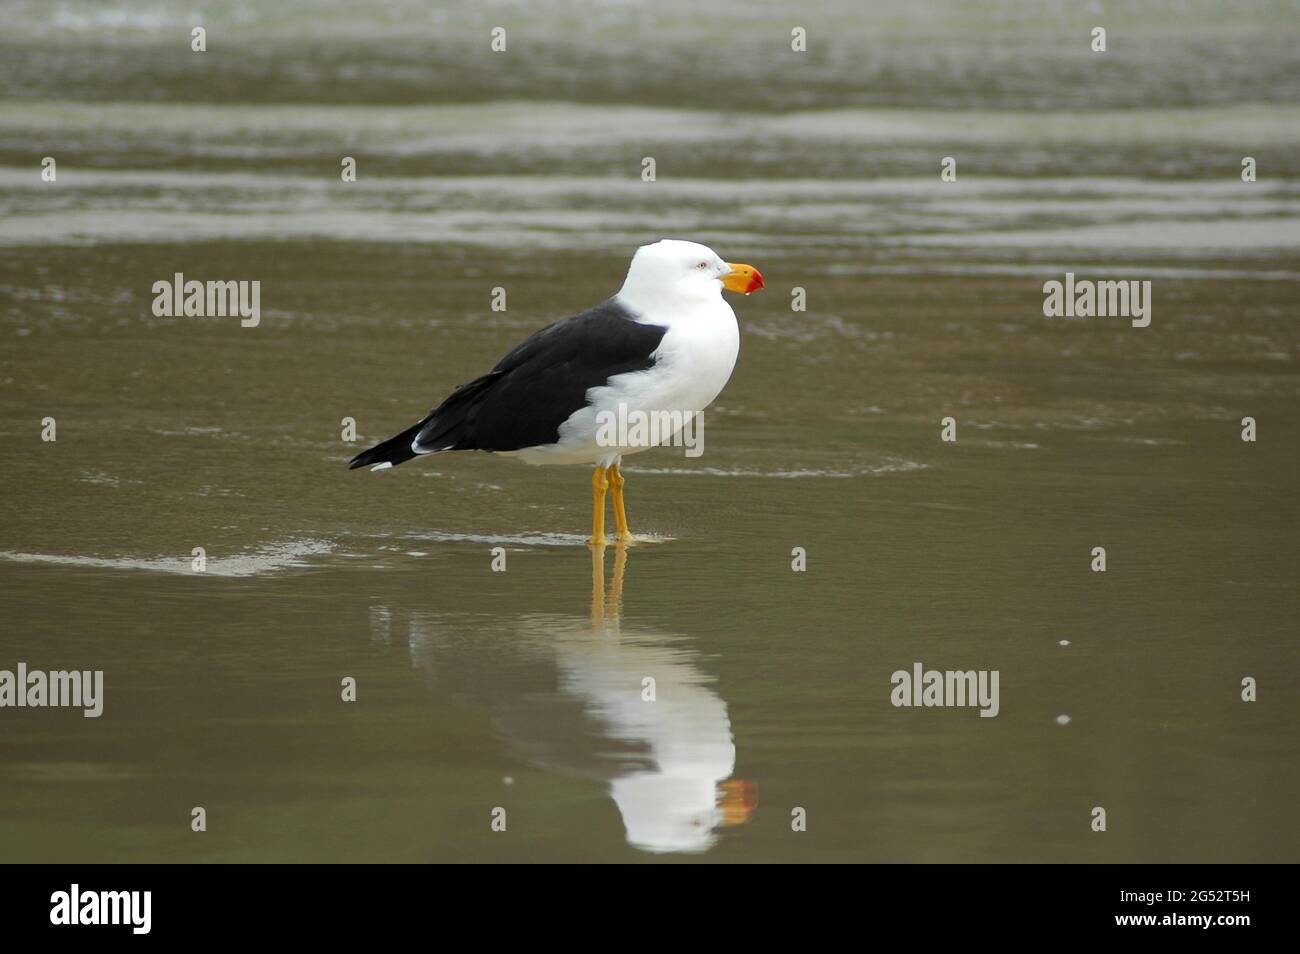 Pacific Gull.  Larus pacificus) Eastern form. Tidal River, Wilsons Promontory, Australia. Stock Photo